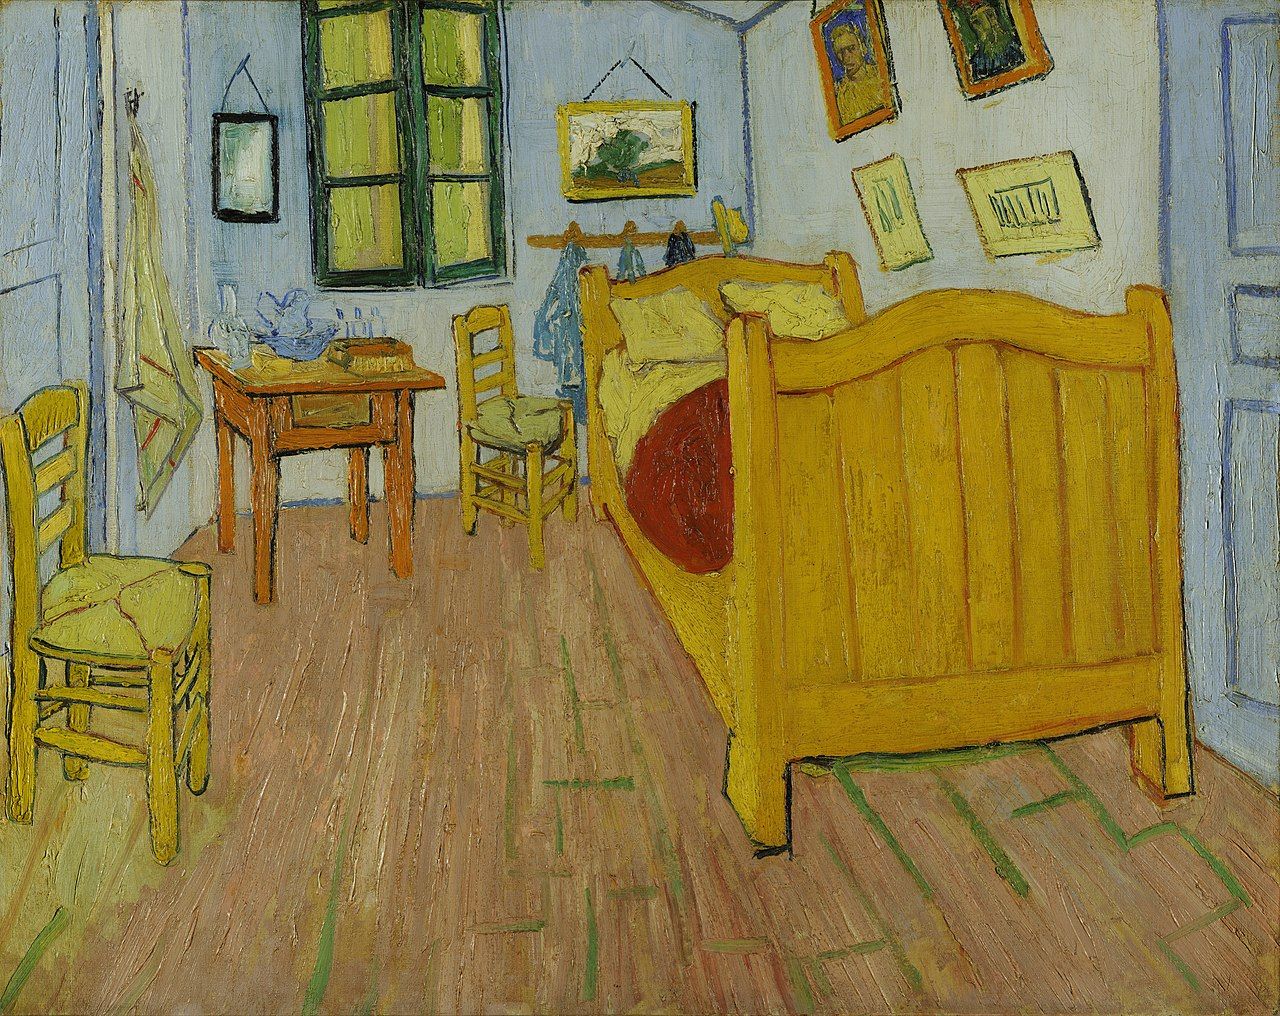 The painting &quot;The Bedroom&quot;, realized by Vincent van Gogh in 1888, depicts his bedroom in Arles, France. The door to the right opened on to the upper floor and the staircase; the door to the left was that of the guest room he held prepared for Gauguin; the window in the front wall looked on to Place Lamartine and its public gardens.